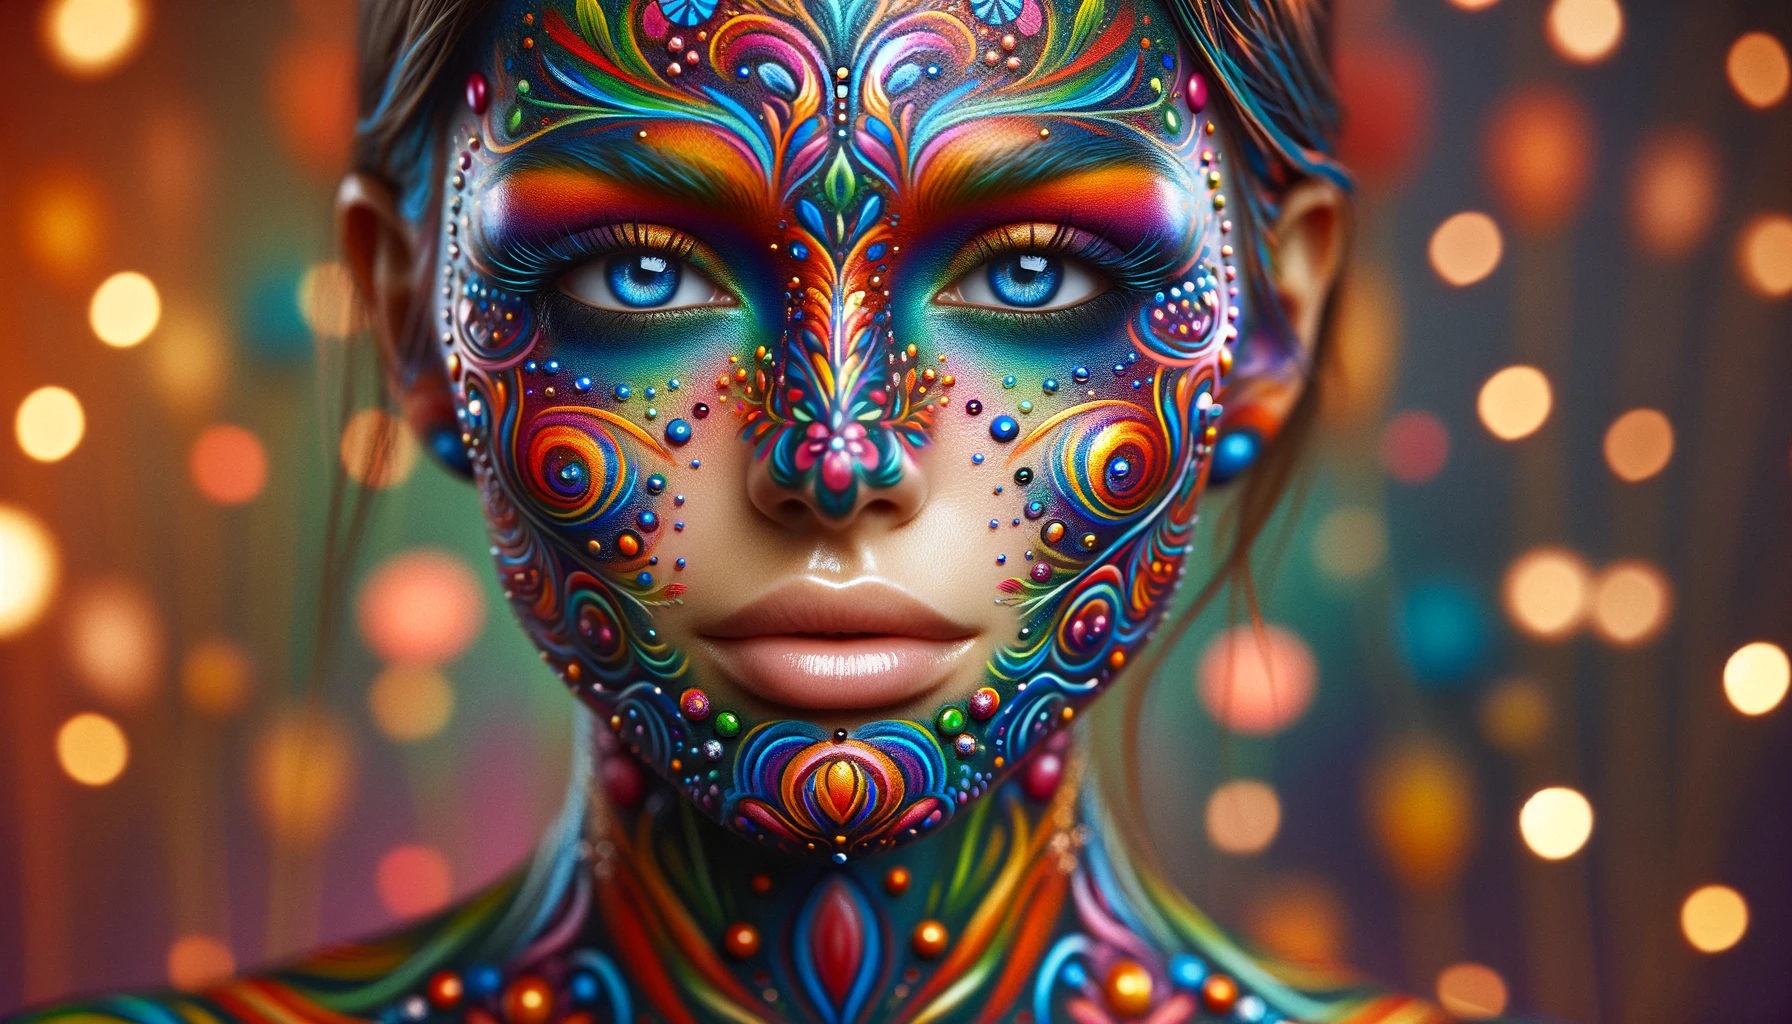 Oil-Based Face Paint on a girl's face